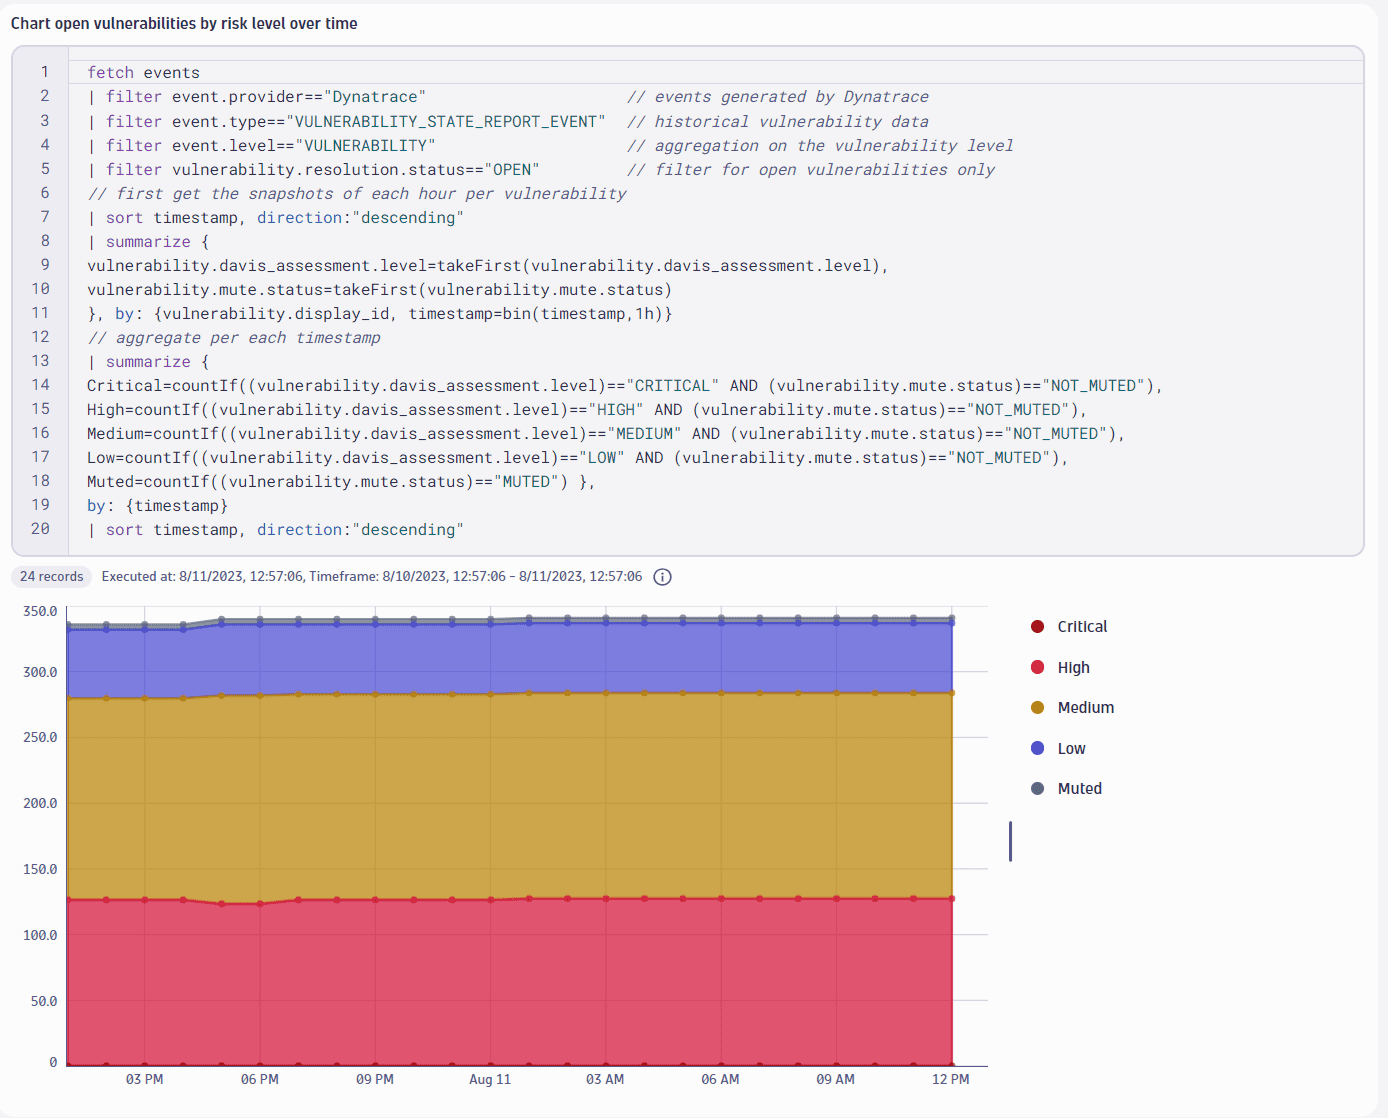 Track vulnerability counts over time